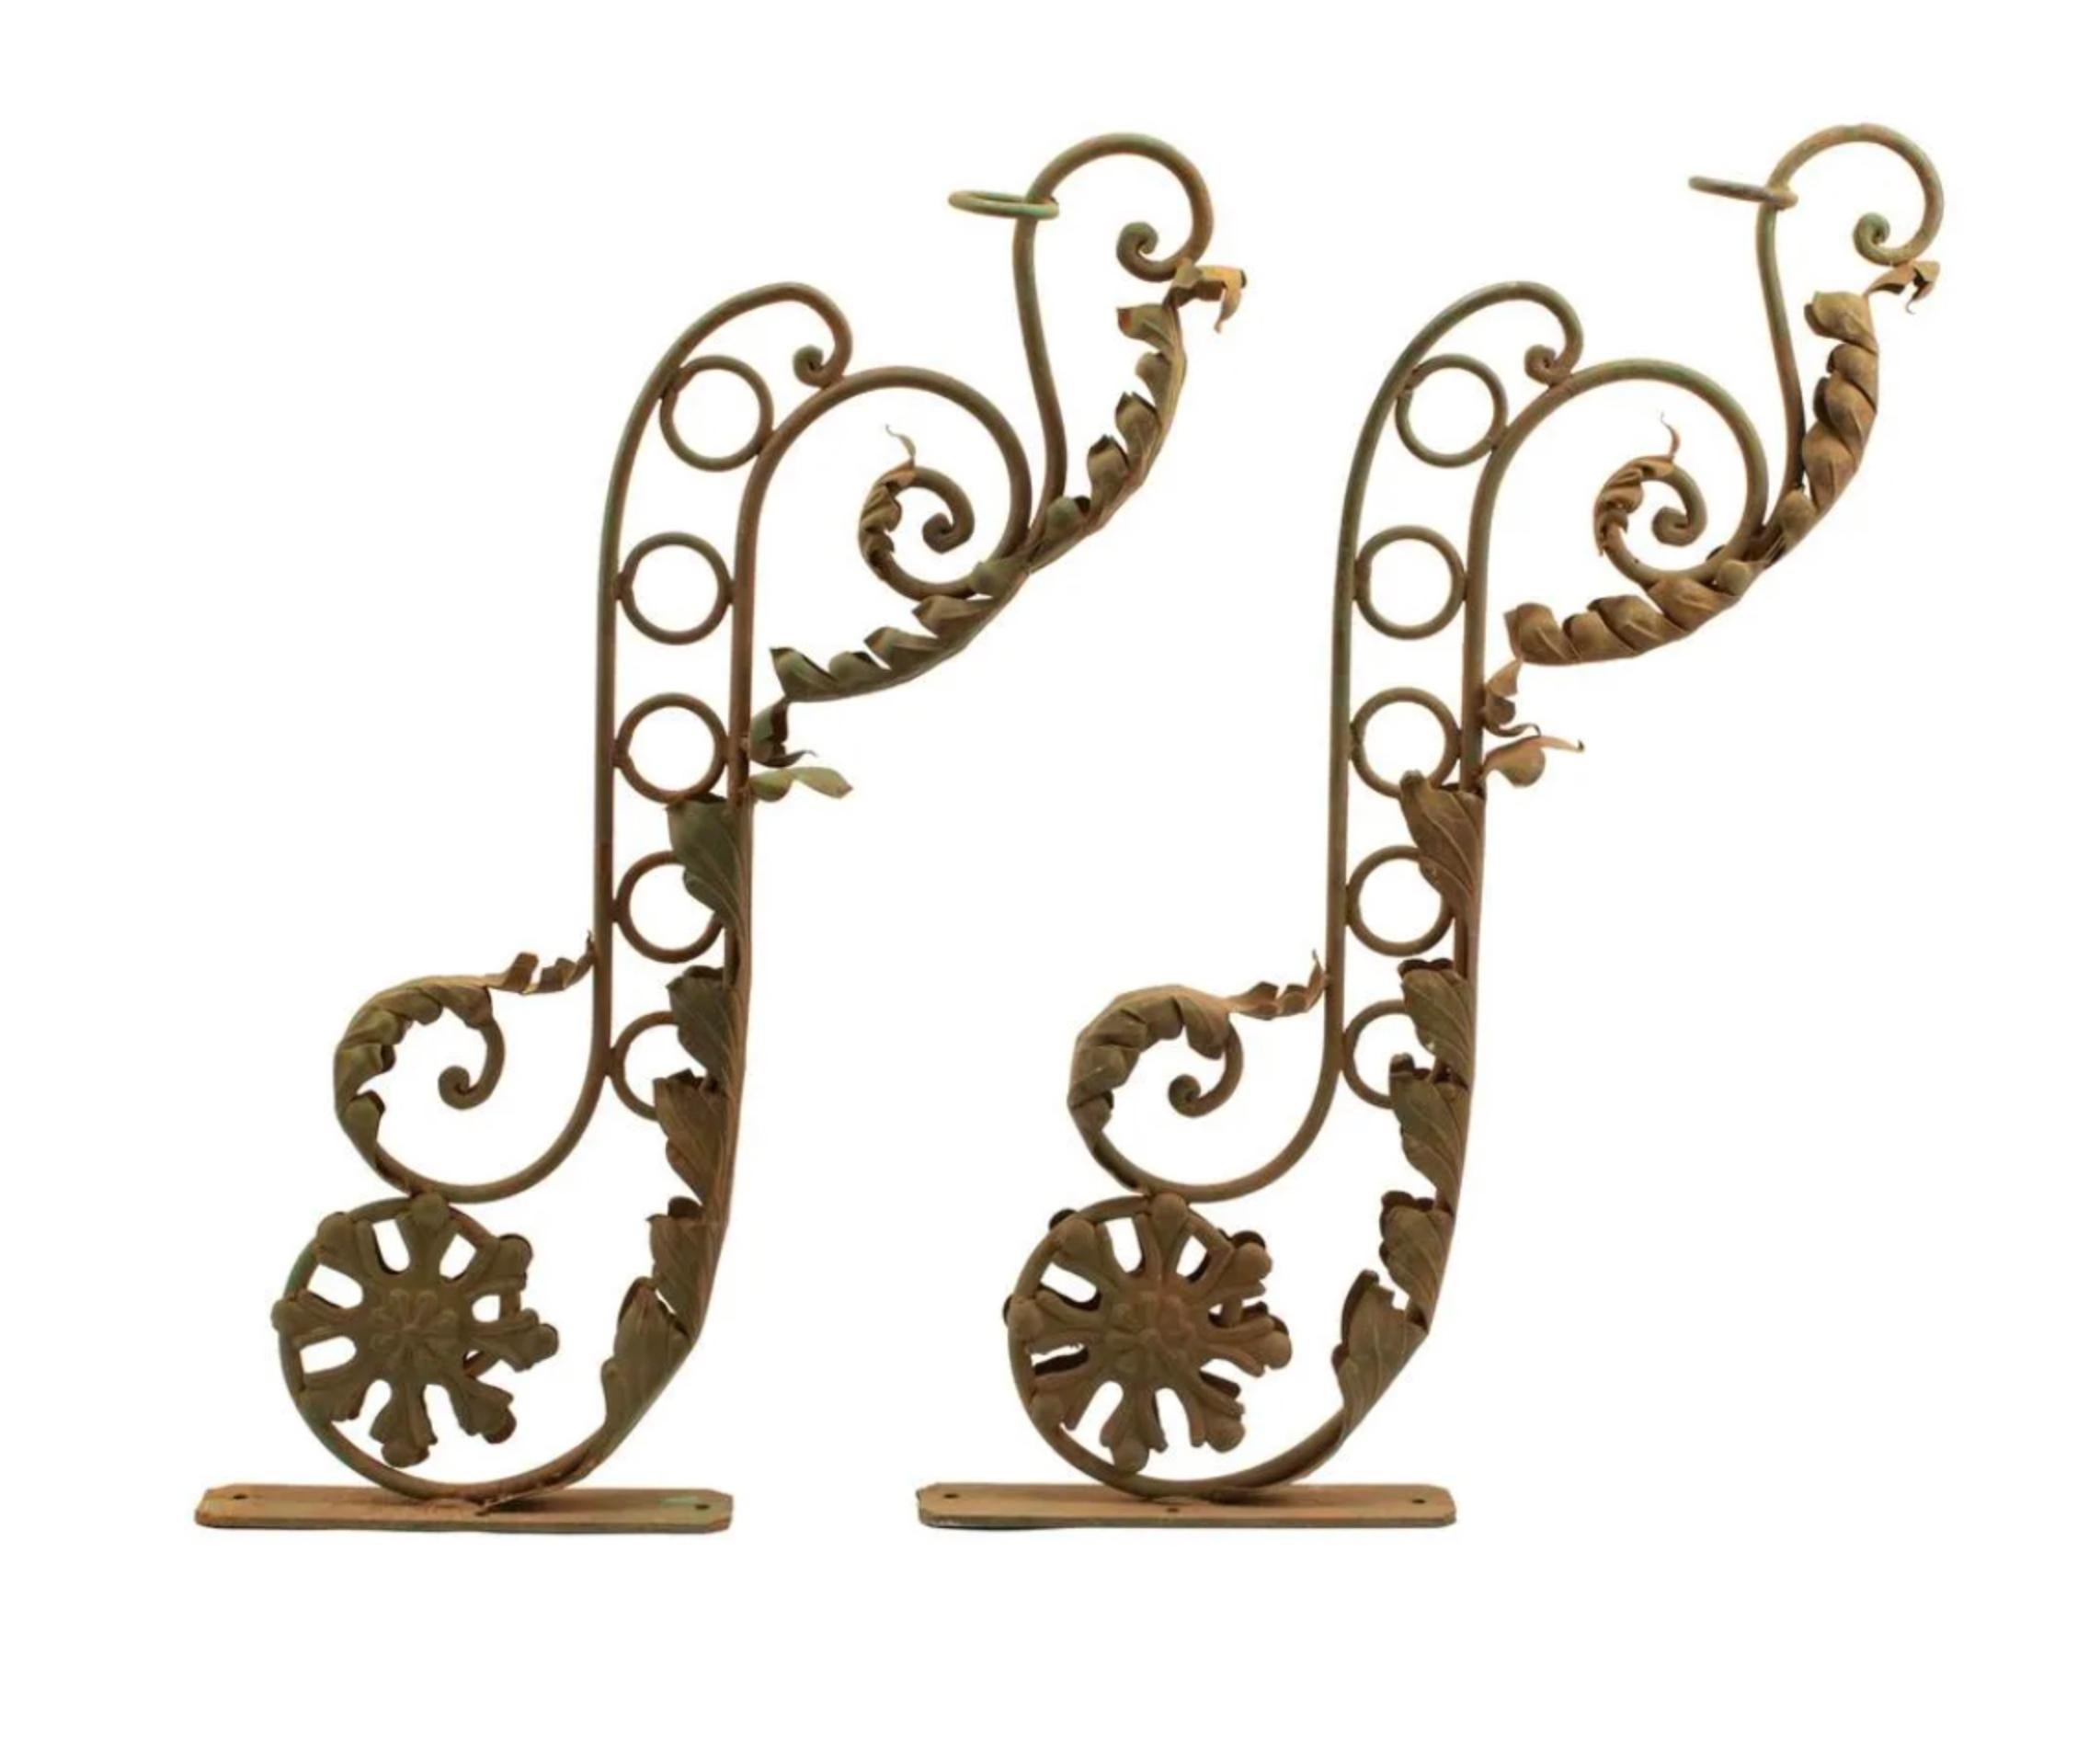 19th Century New Orleans Wrought Iron Foliate Scroll Sign Brackets - a Pair For Sale